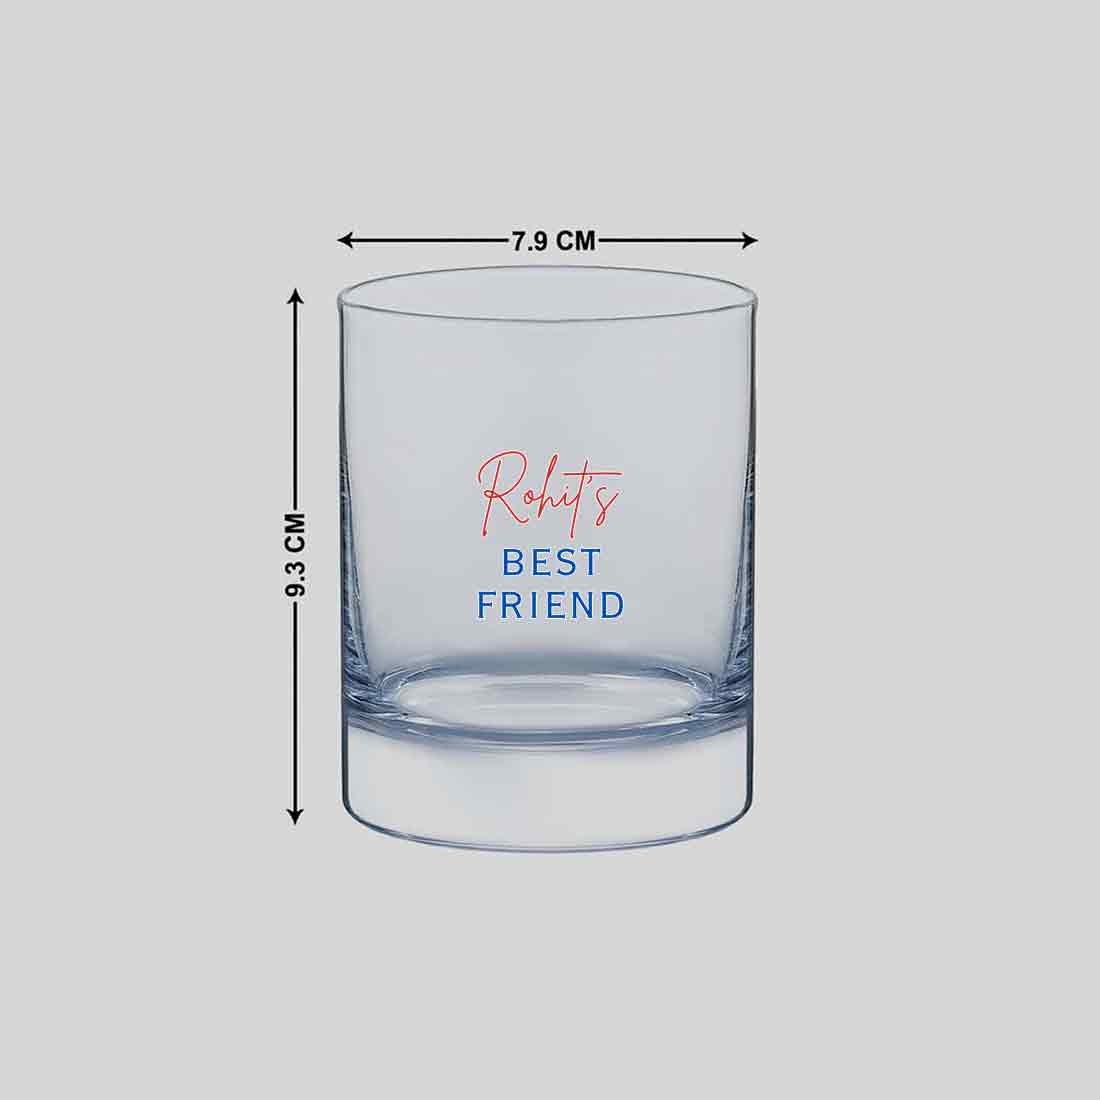 Customised Whiskey Glass with Name Alcohol Drinking Glasses - Best Friend